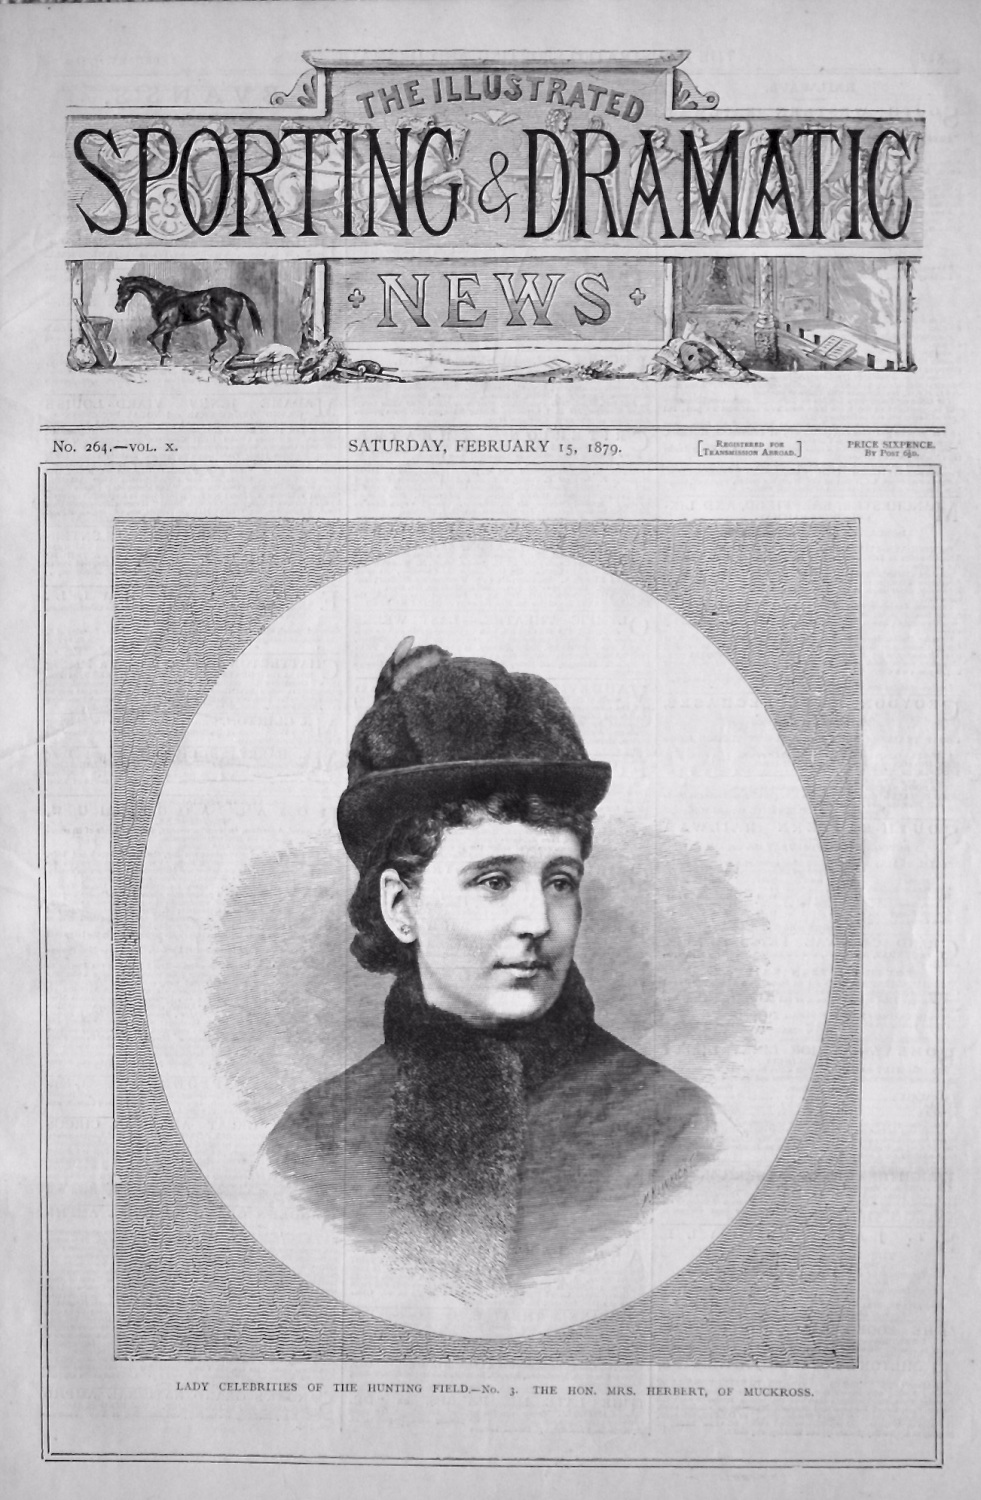 Lady Celebrities of the Hunting Field.- No. 3.  The Hon. Mrs. Herbert, of M